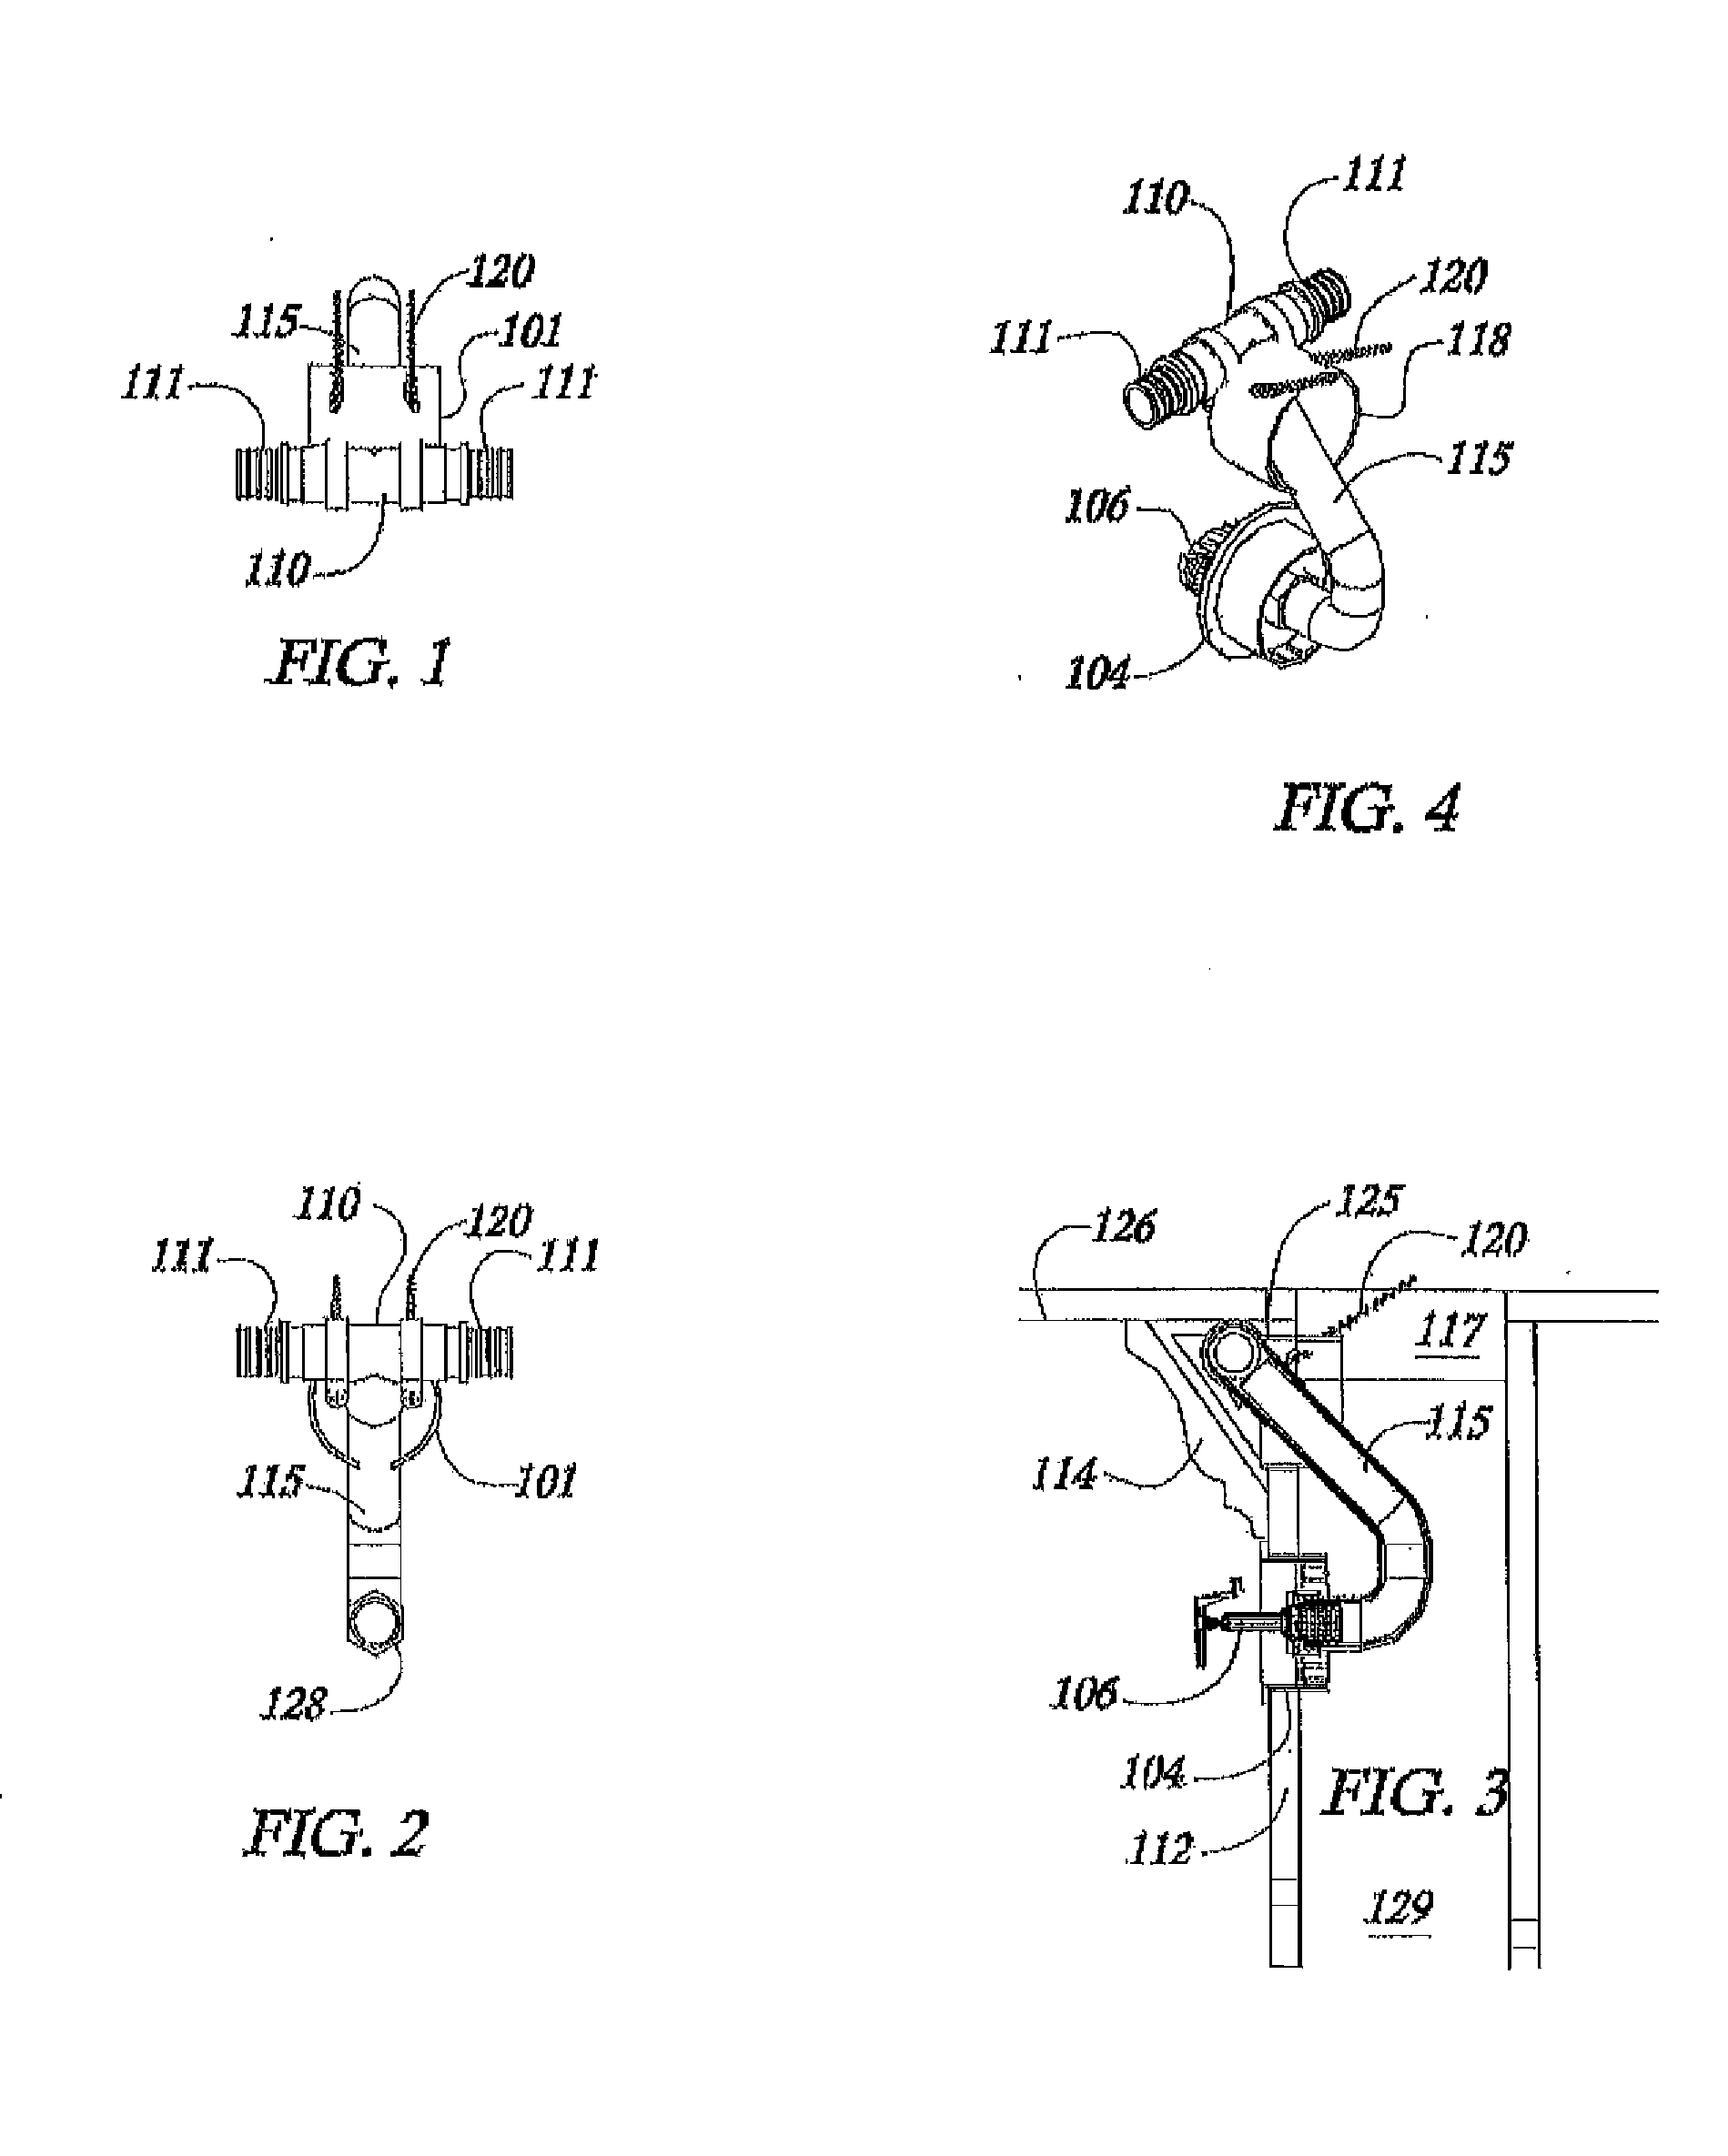 Sprinkler fitting attachment device